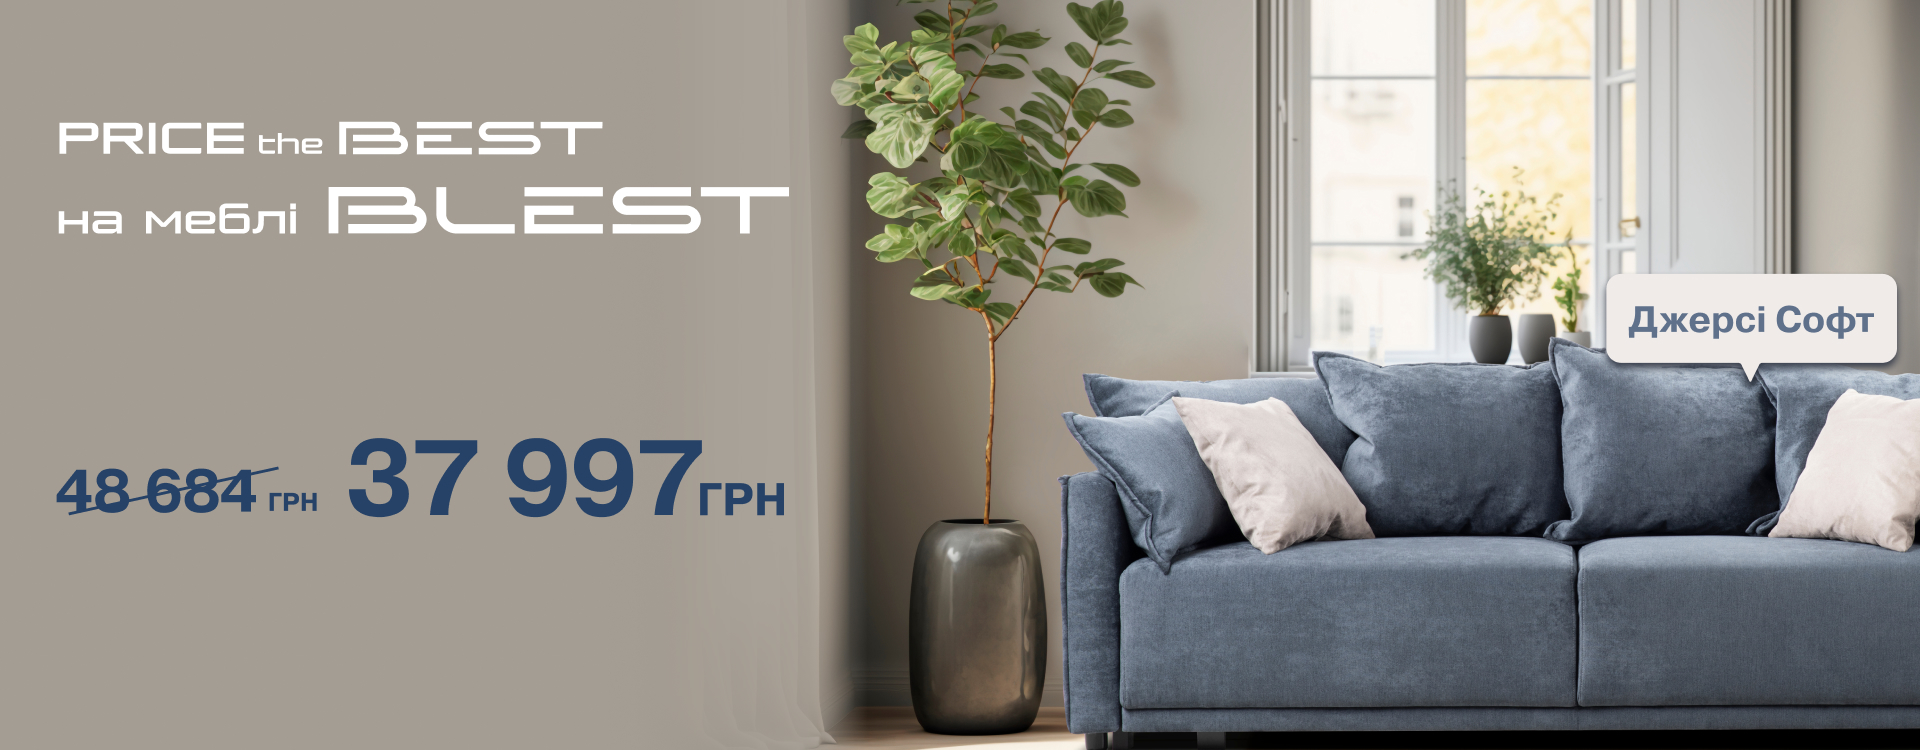 Price the BEST on BLEST furniture